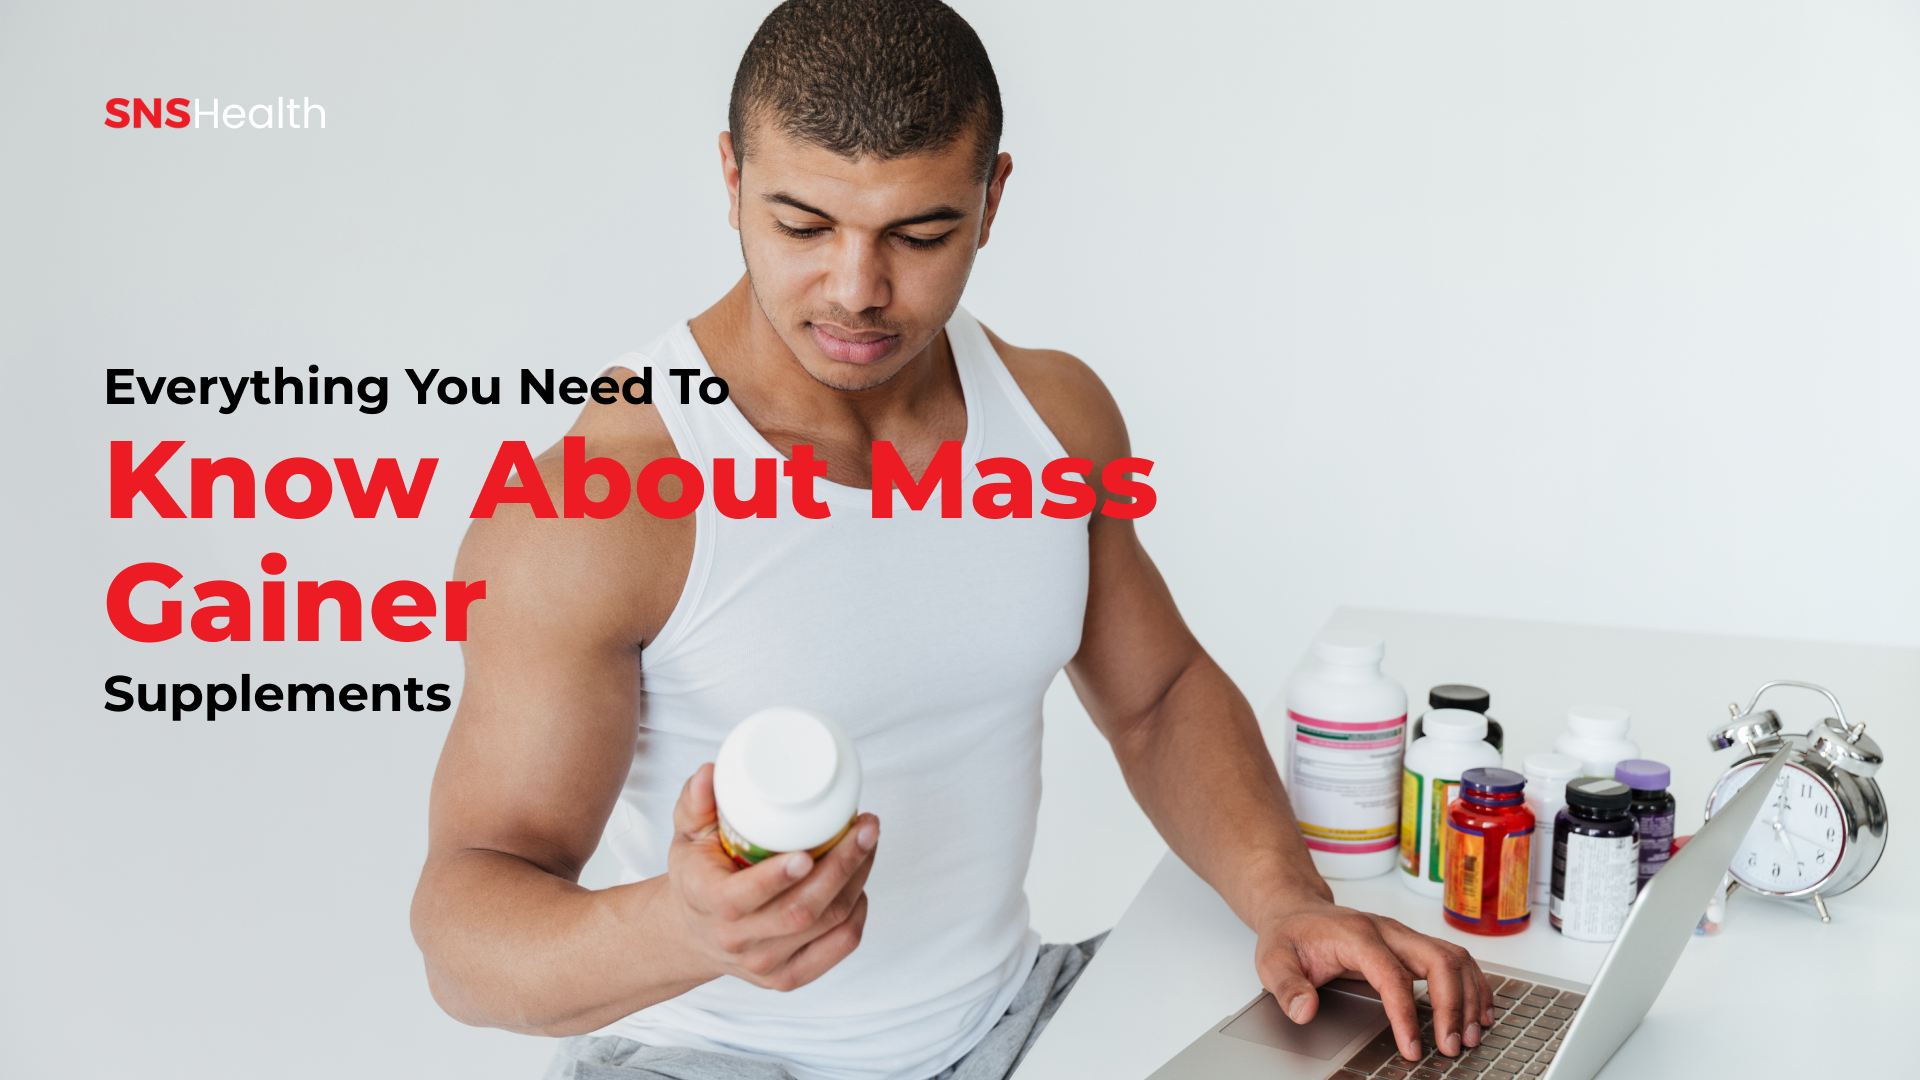 Everything You Need to Know About Mass Gainer Supplements